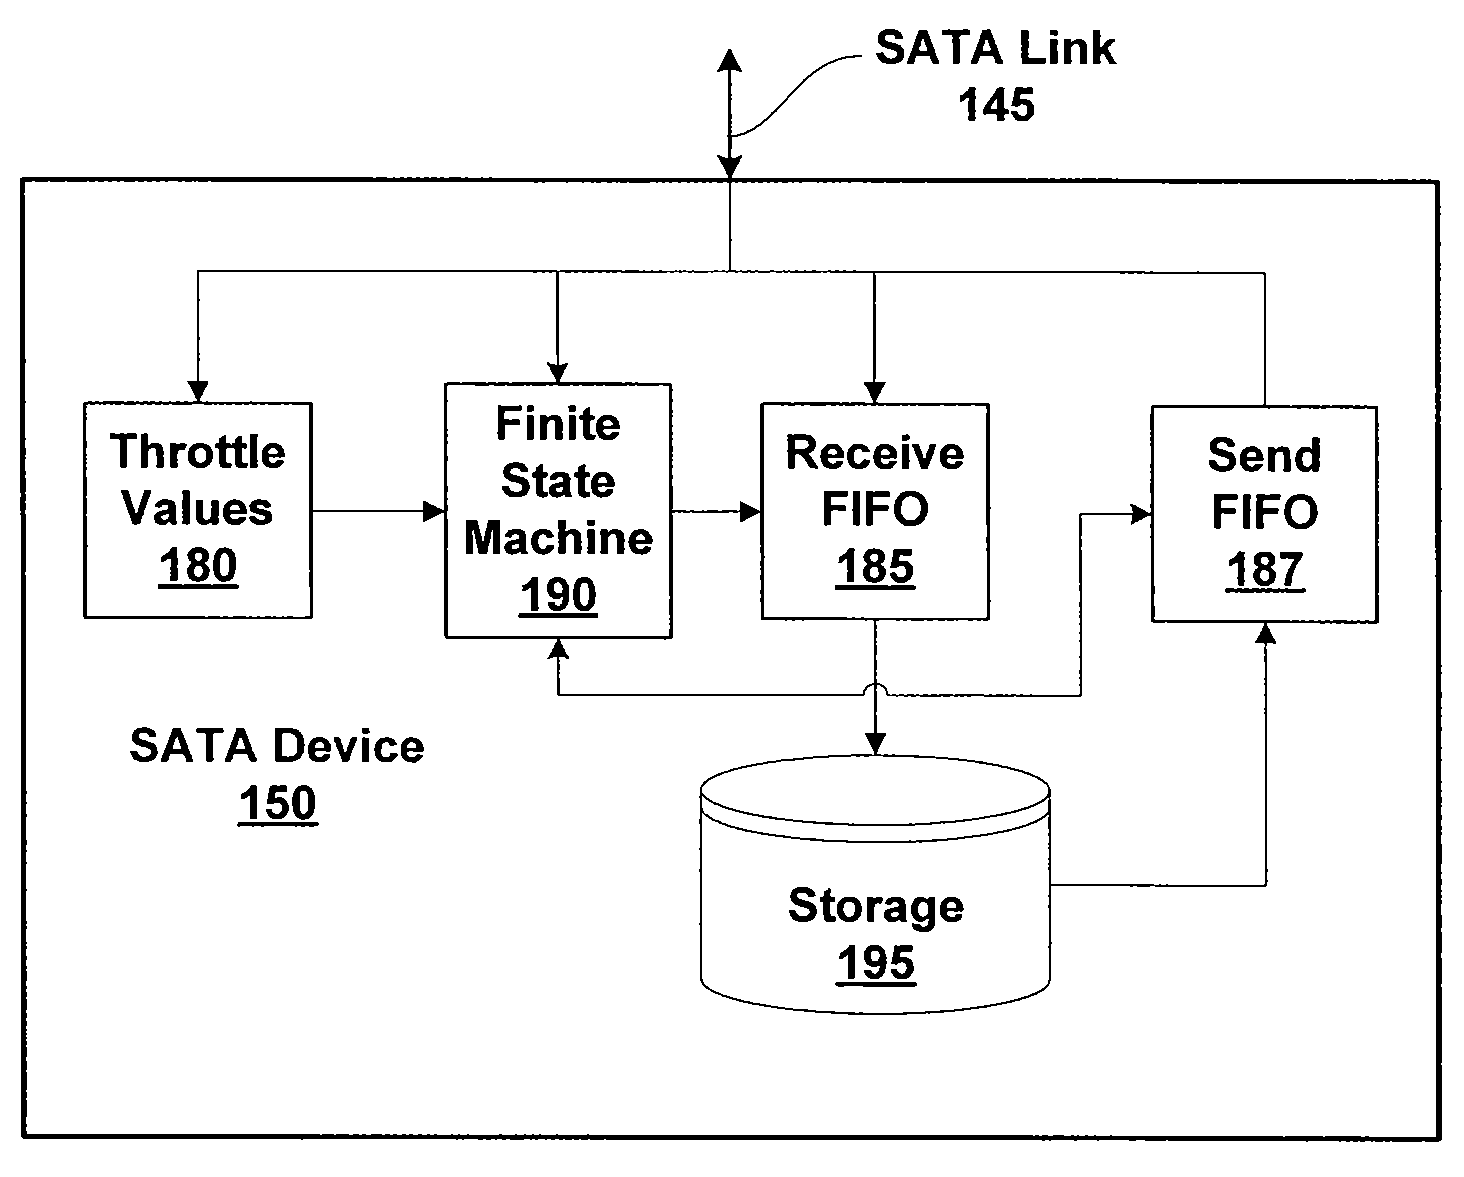 Control data transfer rates for a serial ATA device by throttling values to control insertion of align primitives in data stream over serial ATA connection